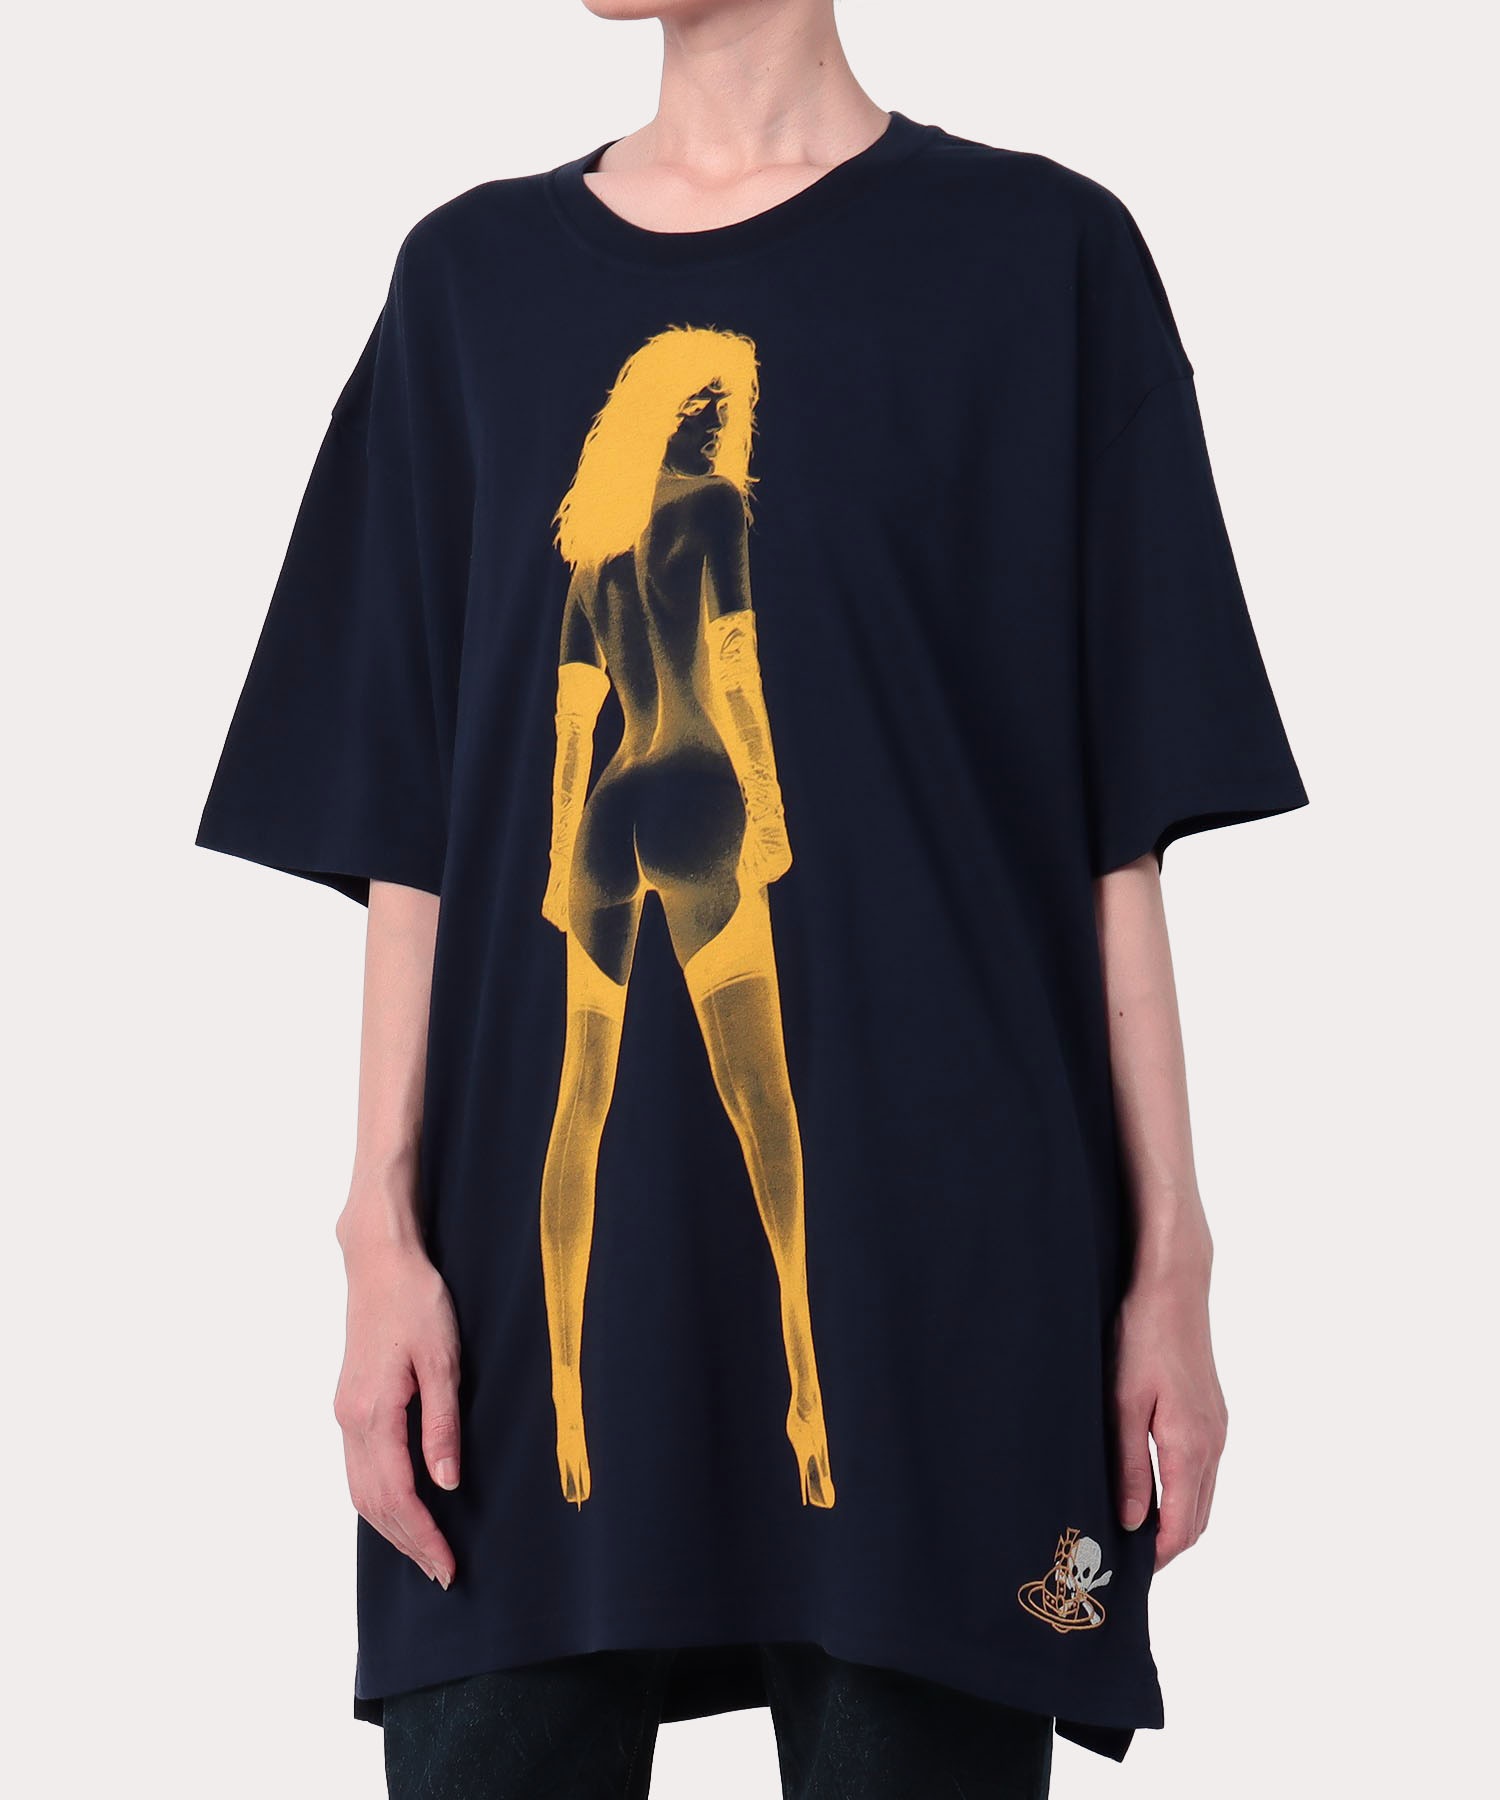 PIN－UP OVERSIZEDTシャツ